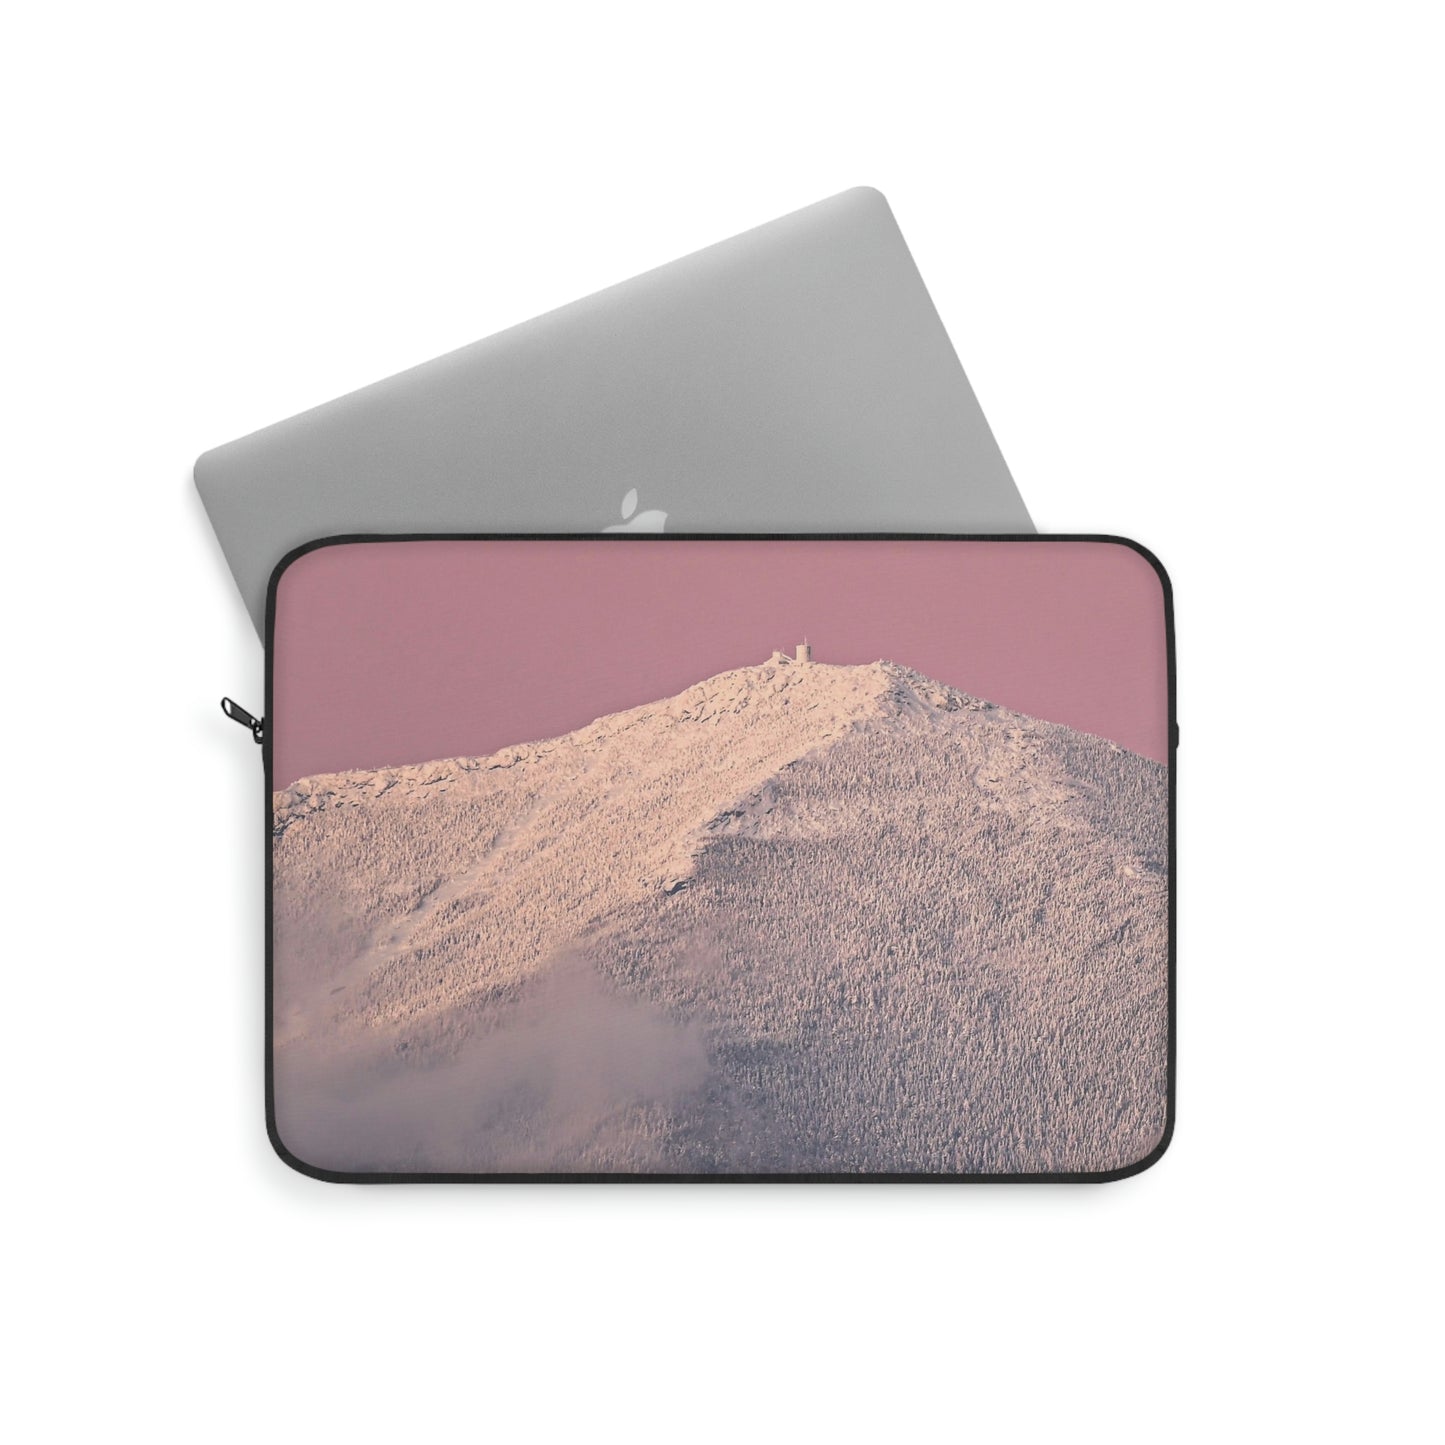 Laptop Sleeve - Pretty in Pink Whiteface